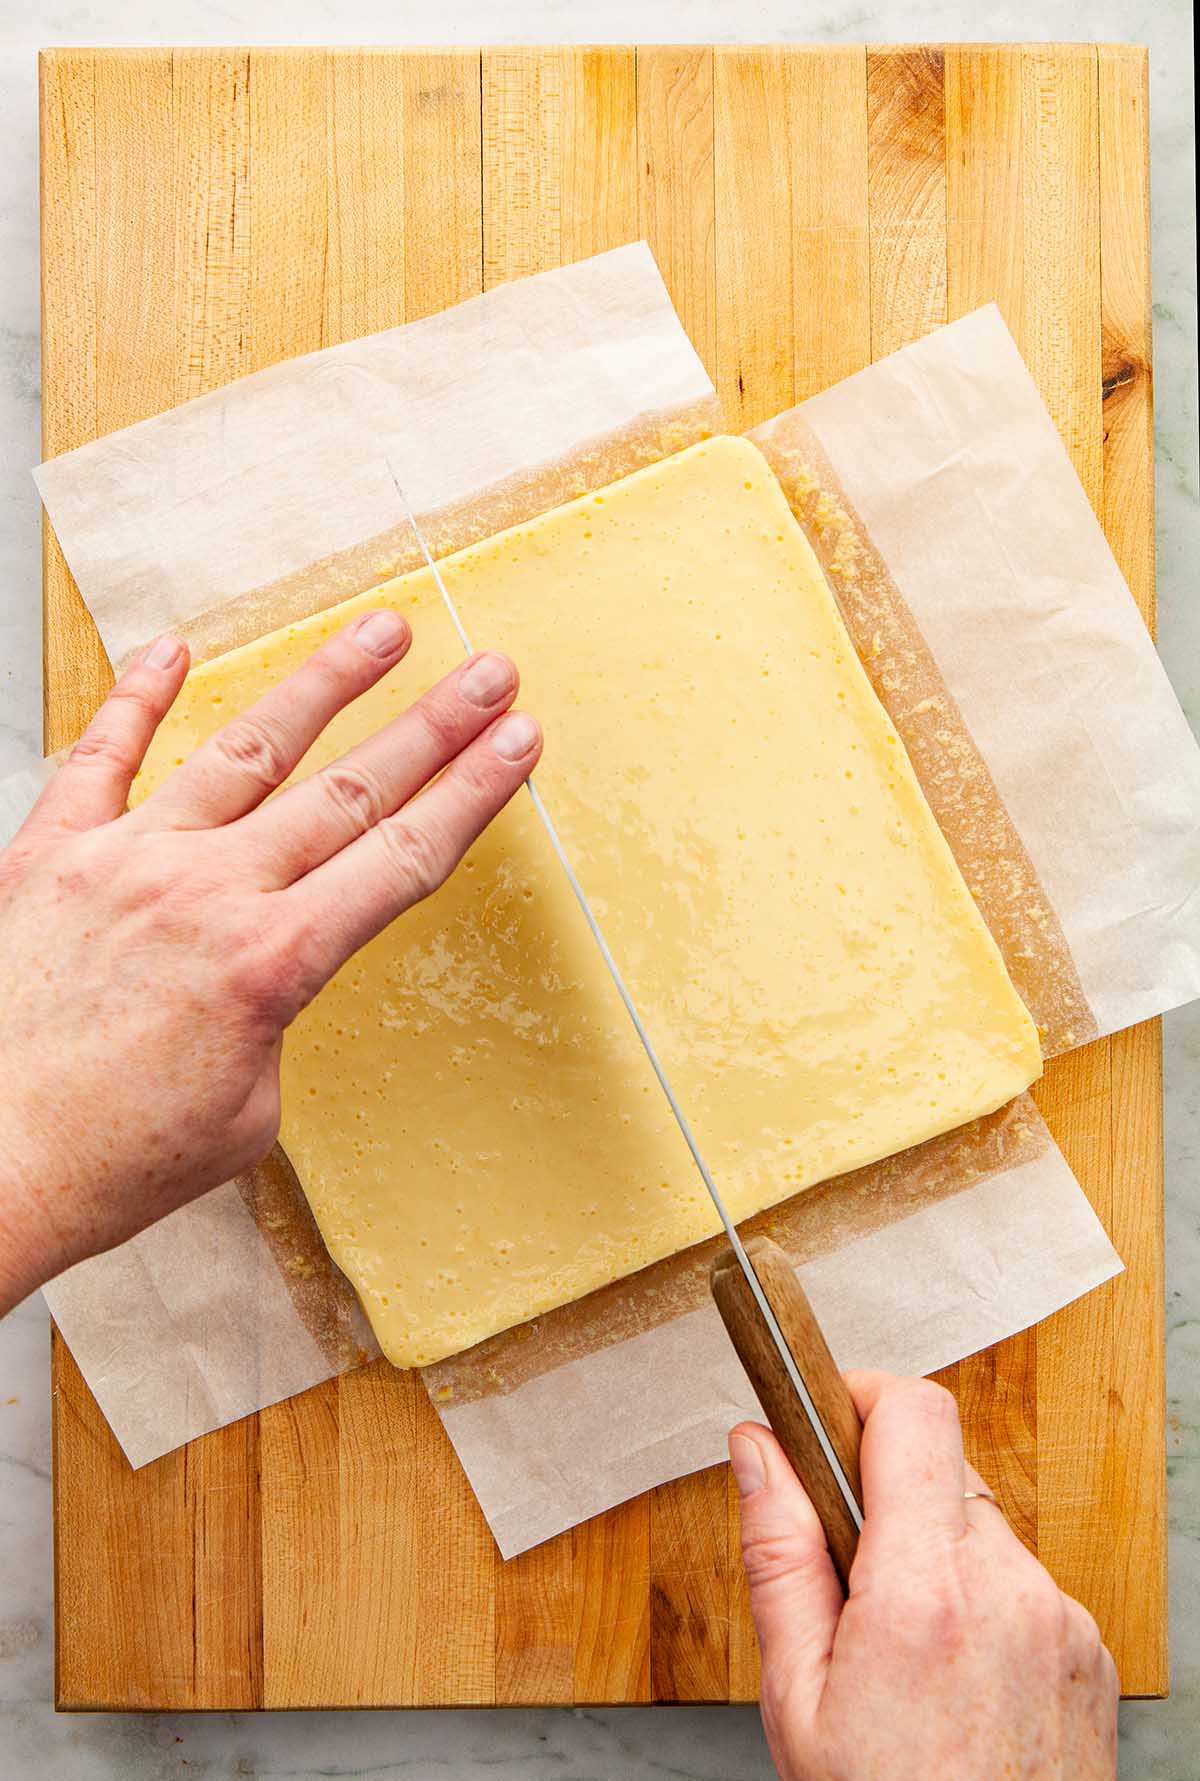 Hands using a long knife to cut lemon bars on a wooden board.